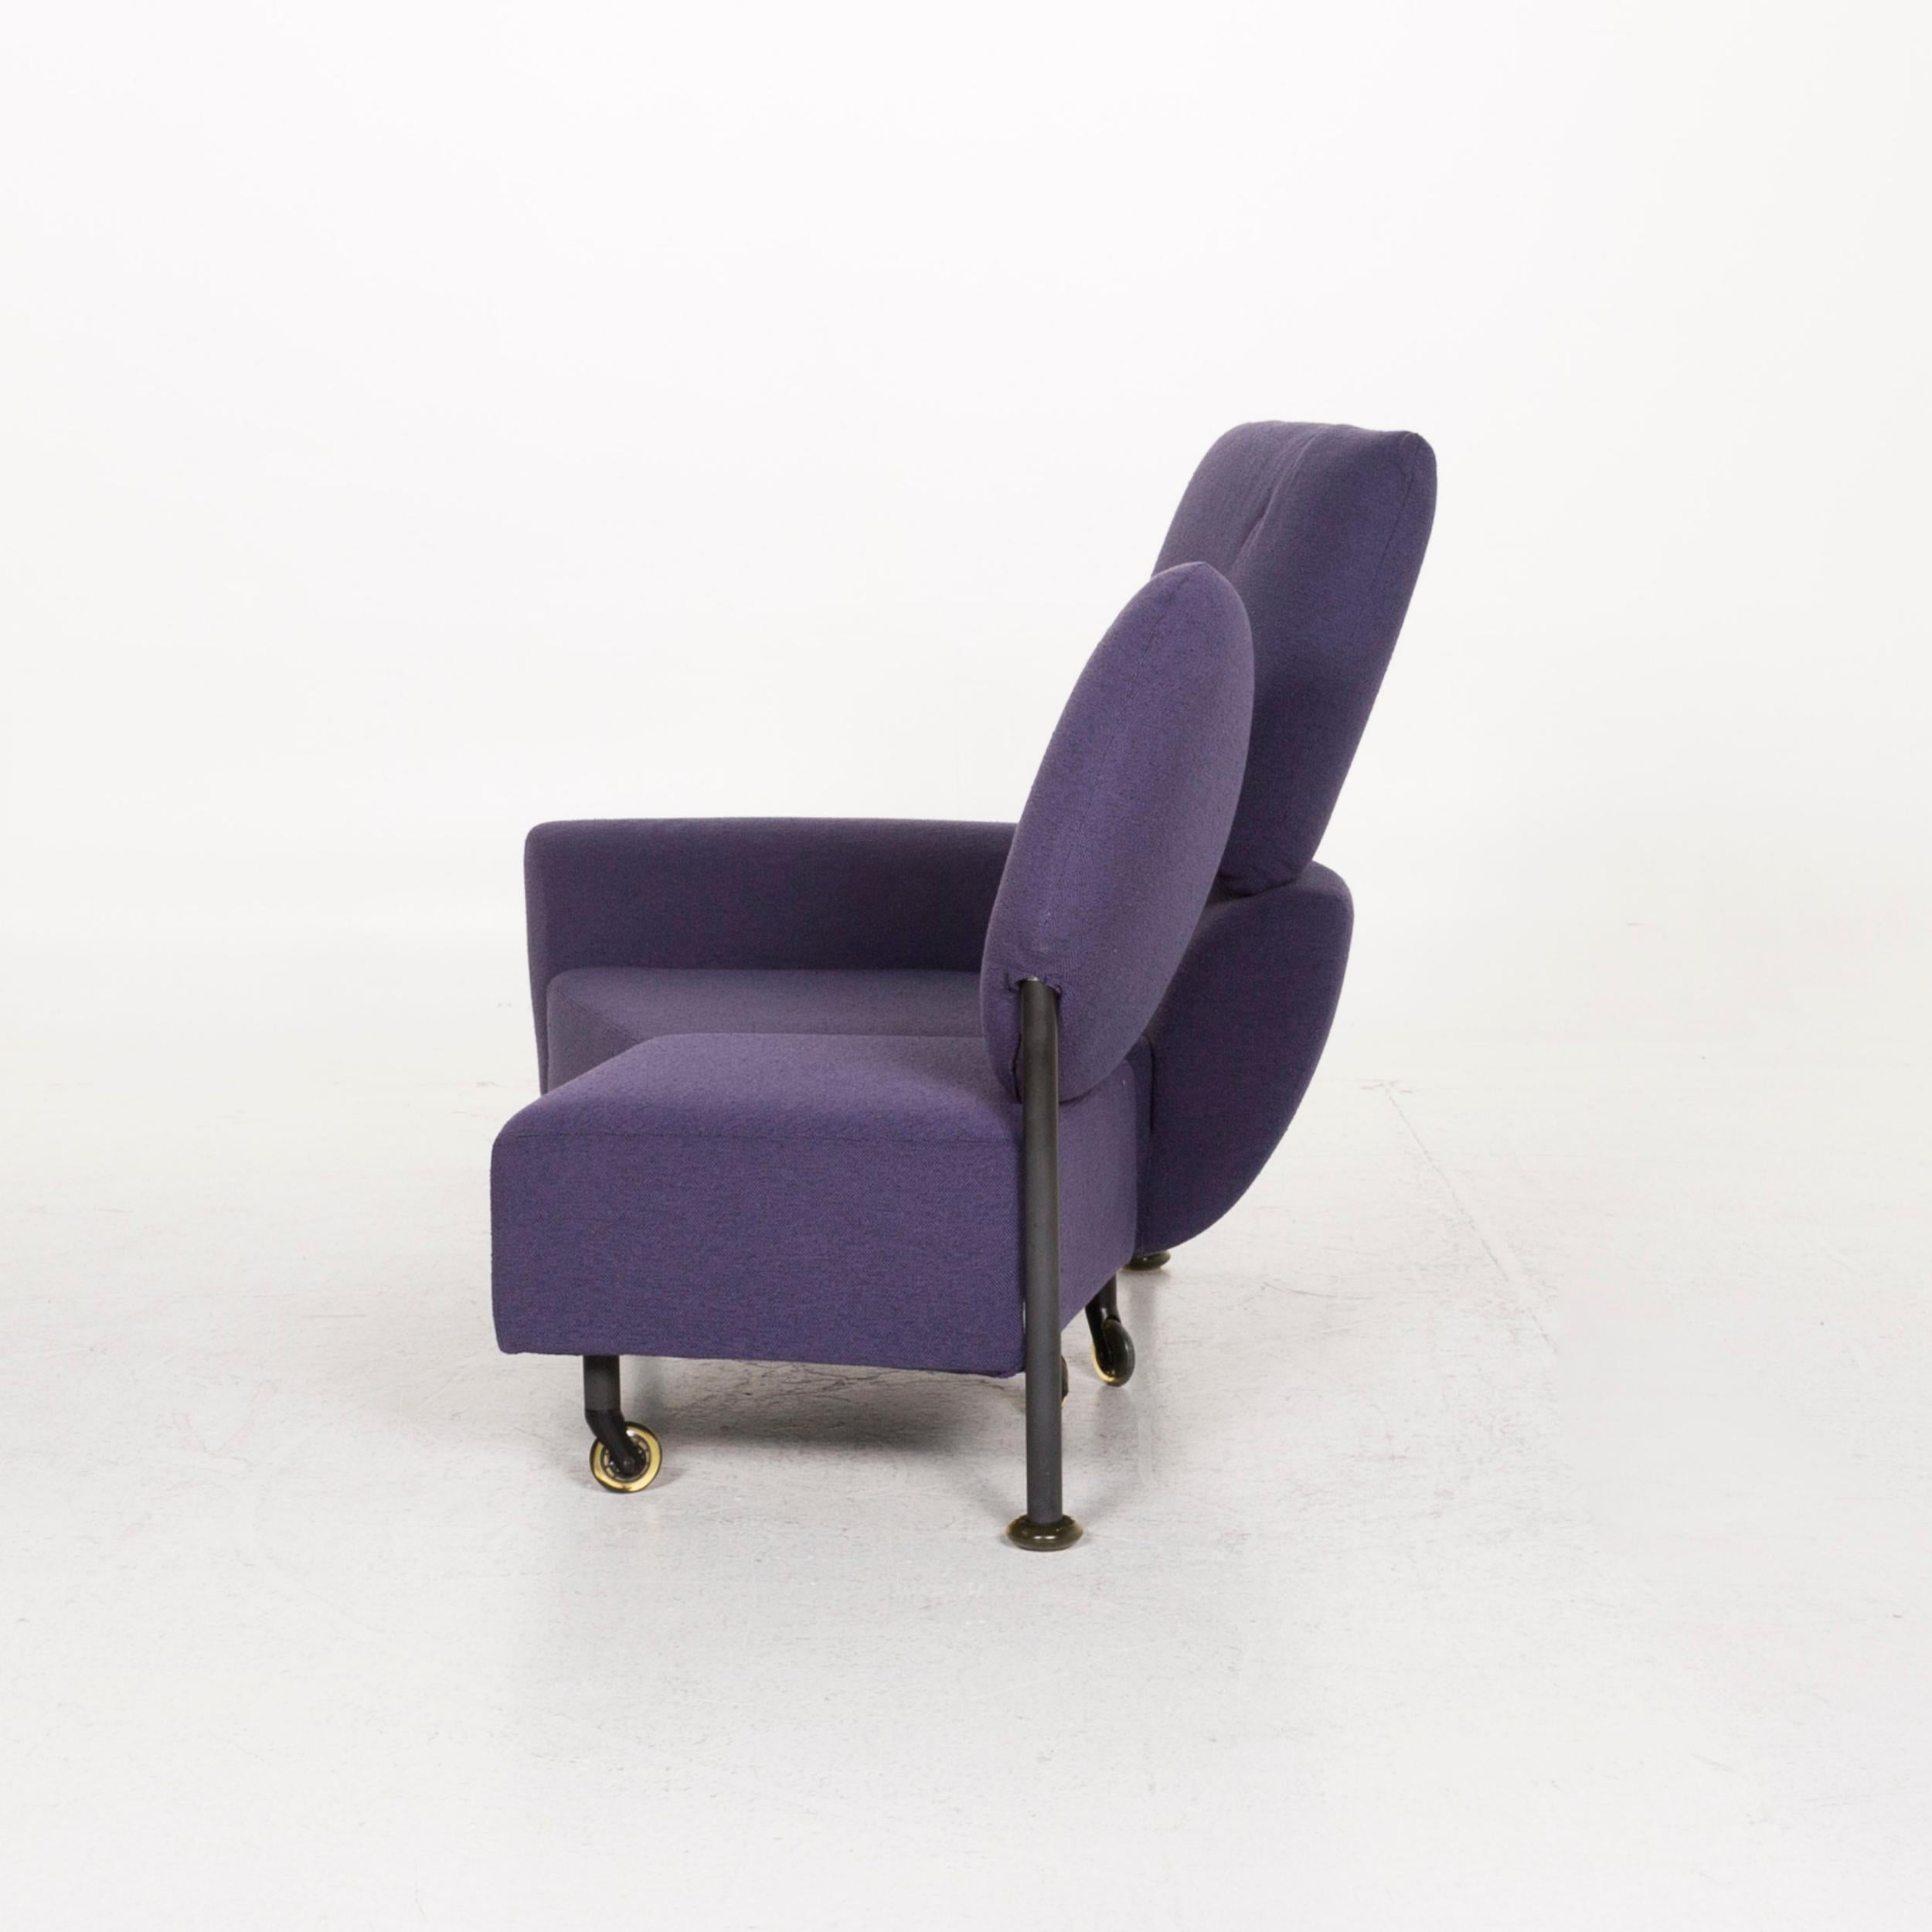 Cassina 290 TopKapi Fabric Sofa Violet Two-Seat Function Relax Function Couch 2